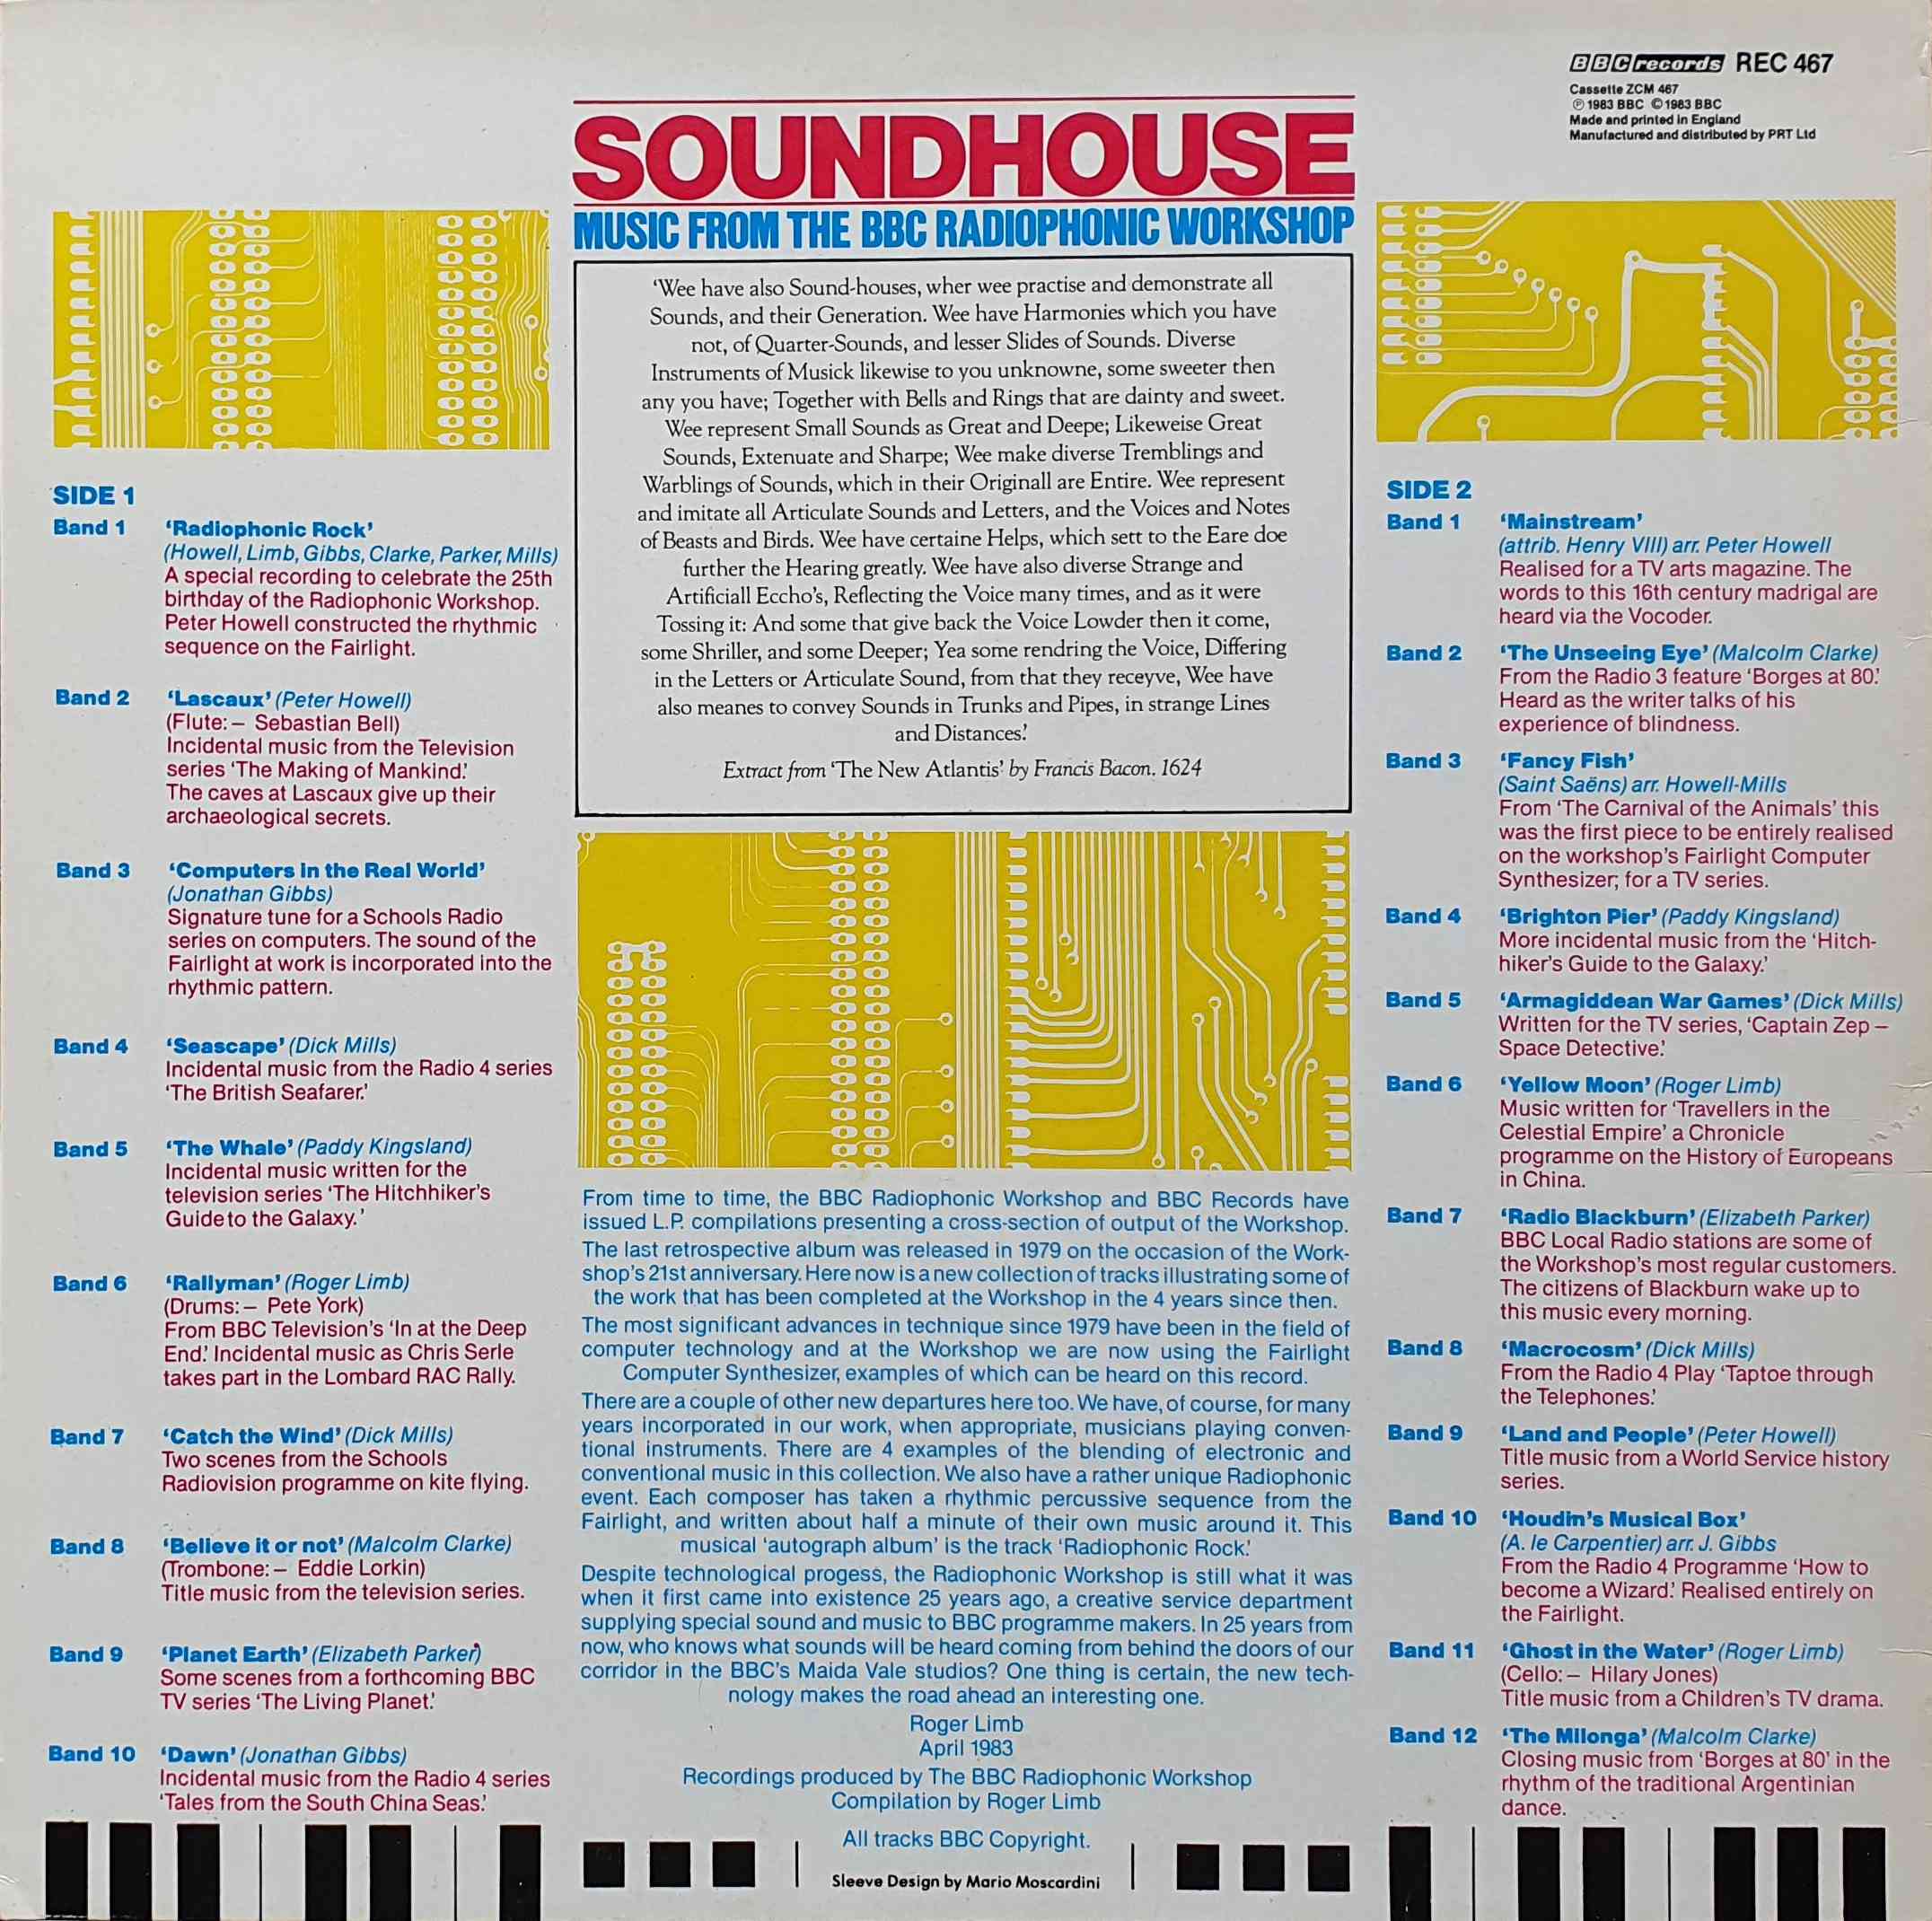 Picture of REC 467 Sound house - Radiophonic workshop by artist Various from the BBC records and Tapes library